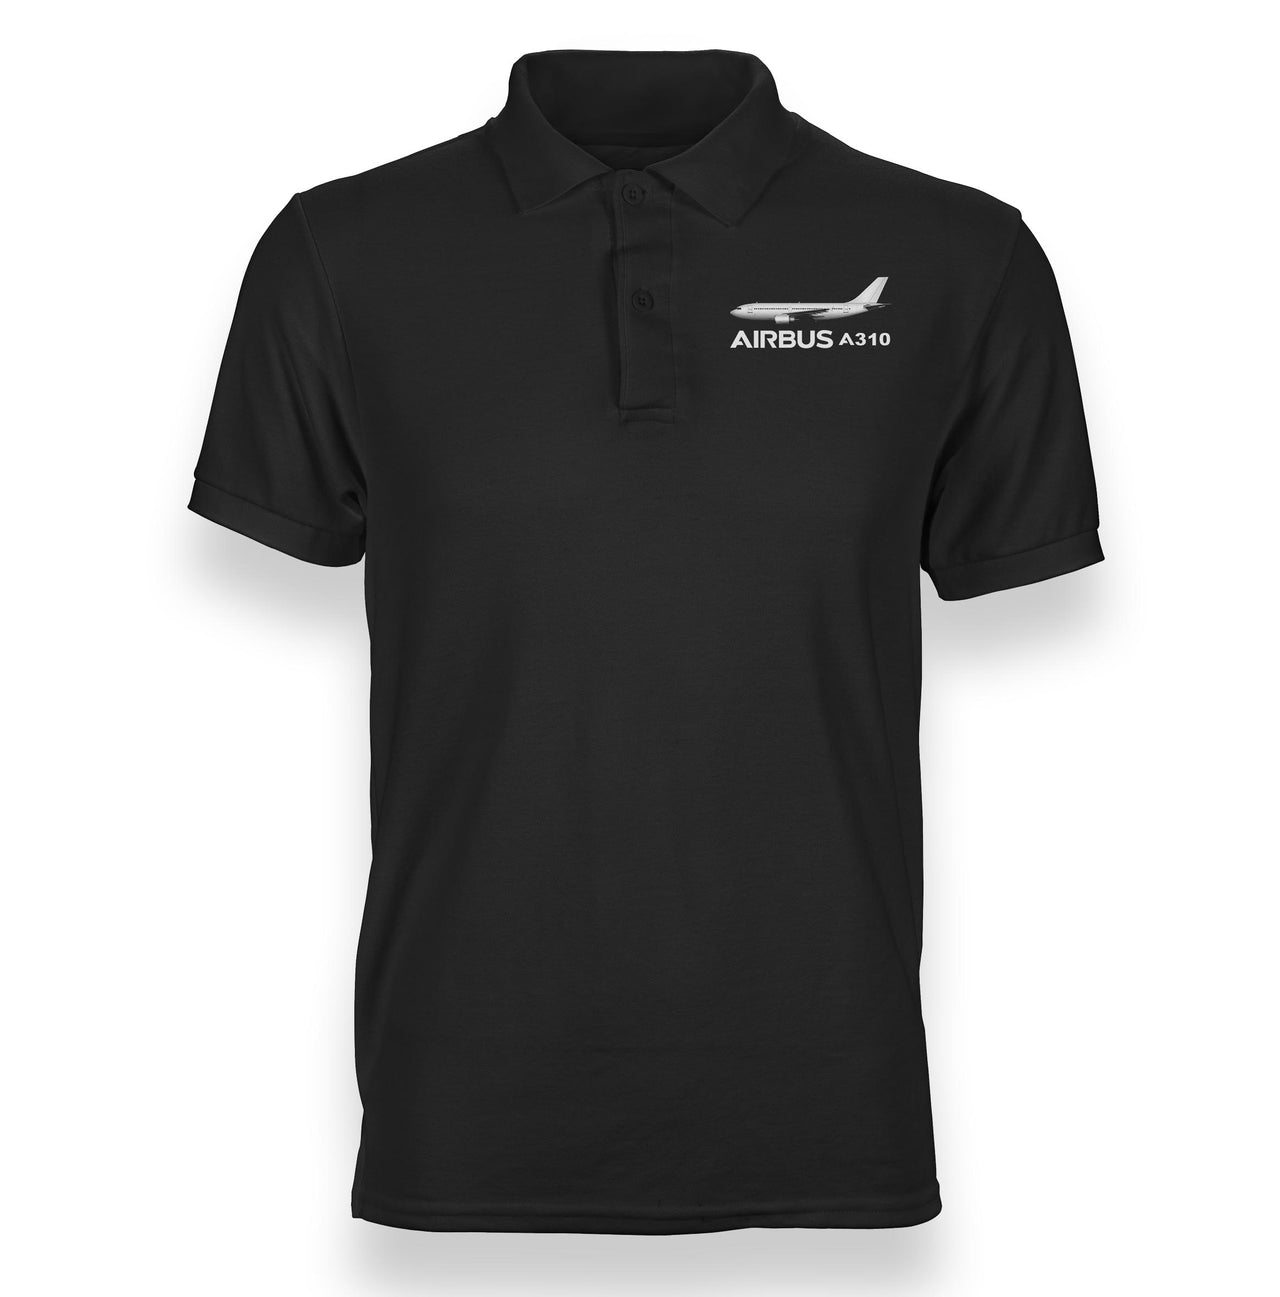 The Airbus A310 Designed Polo T-Shirts